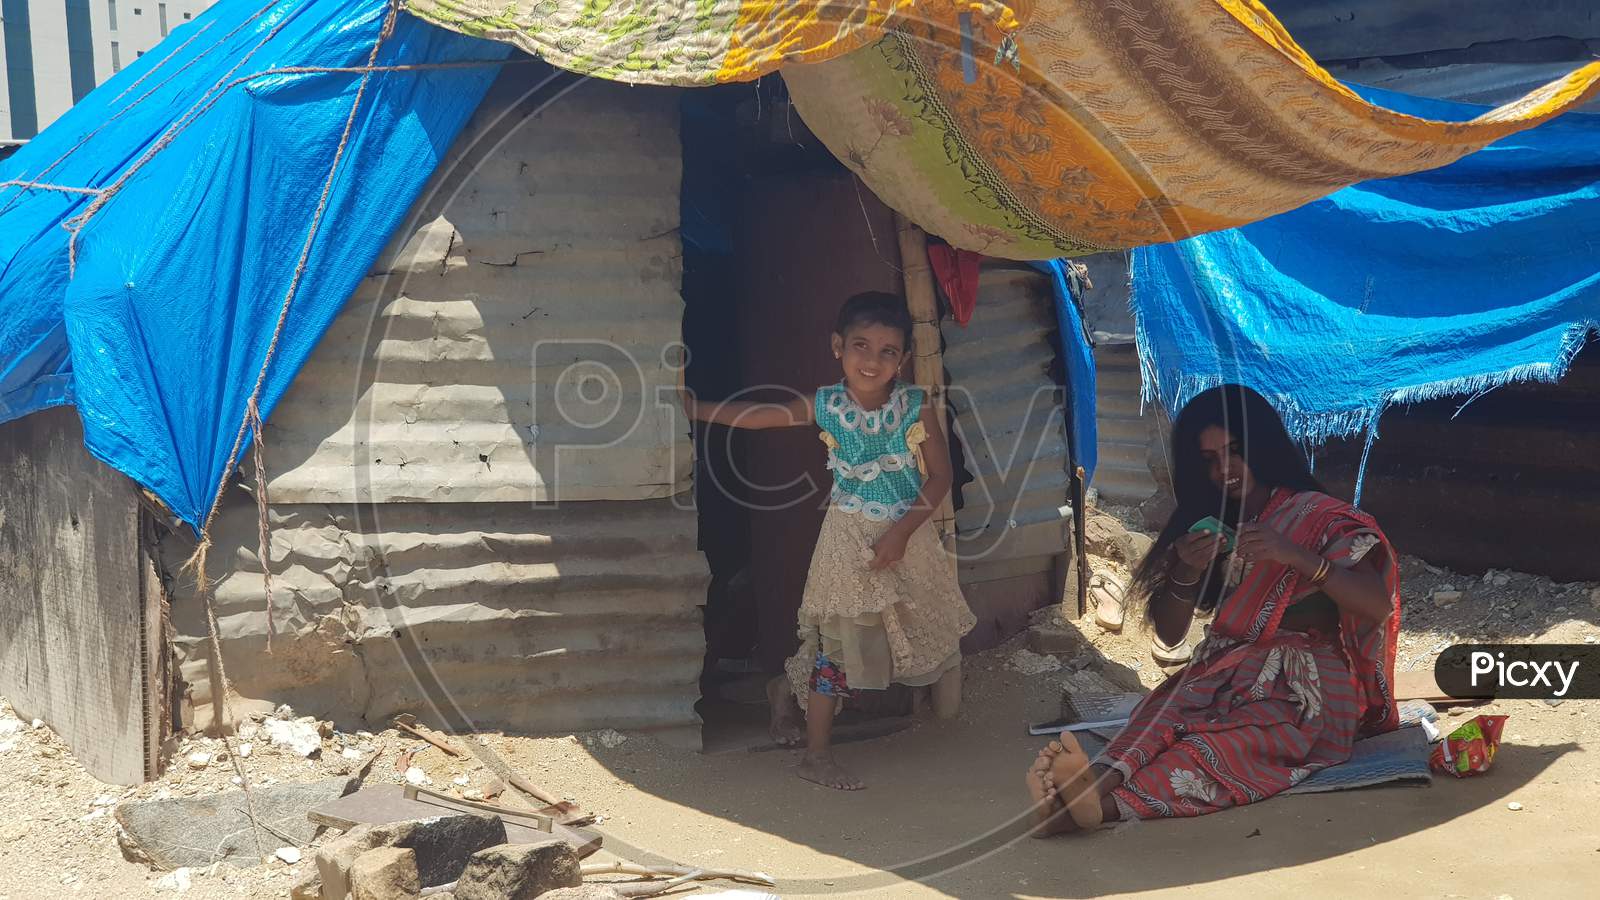 Bengaluru, Karnataka / India - August 20 2019: A mother and daughter in front of their shack in a slum during daytime